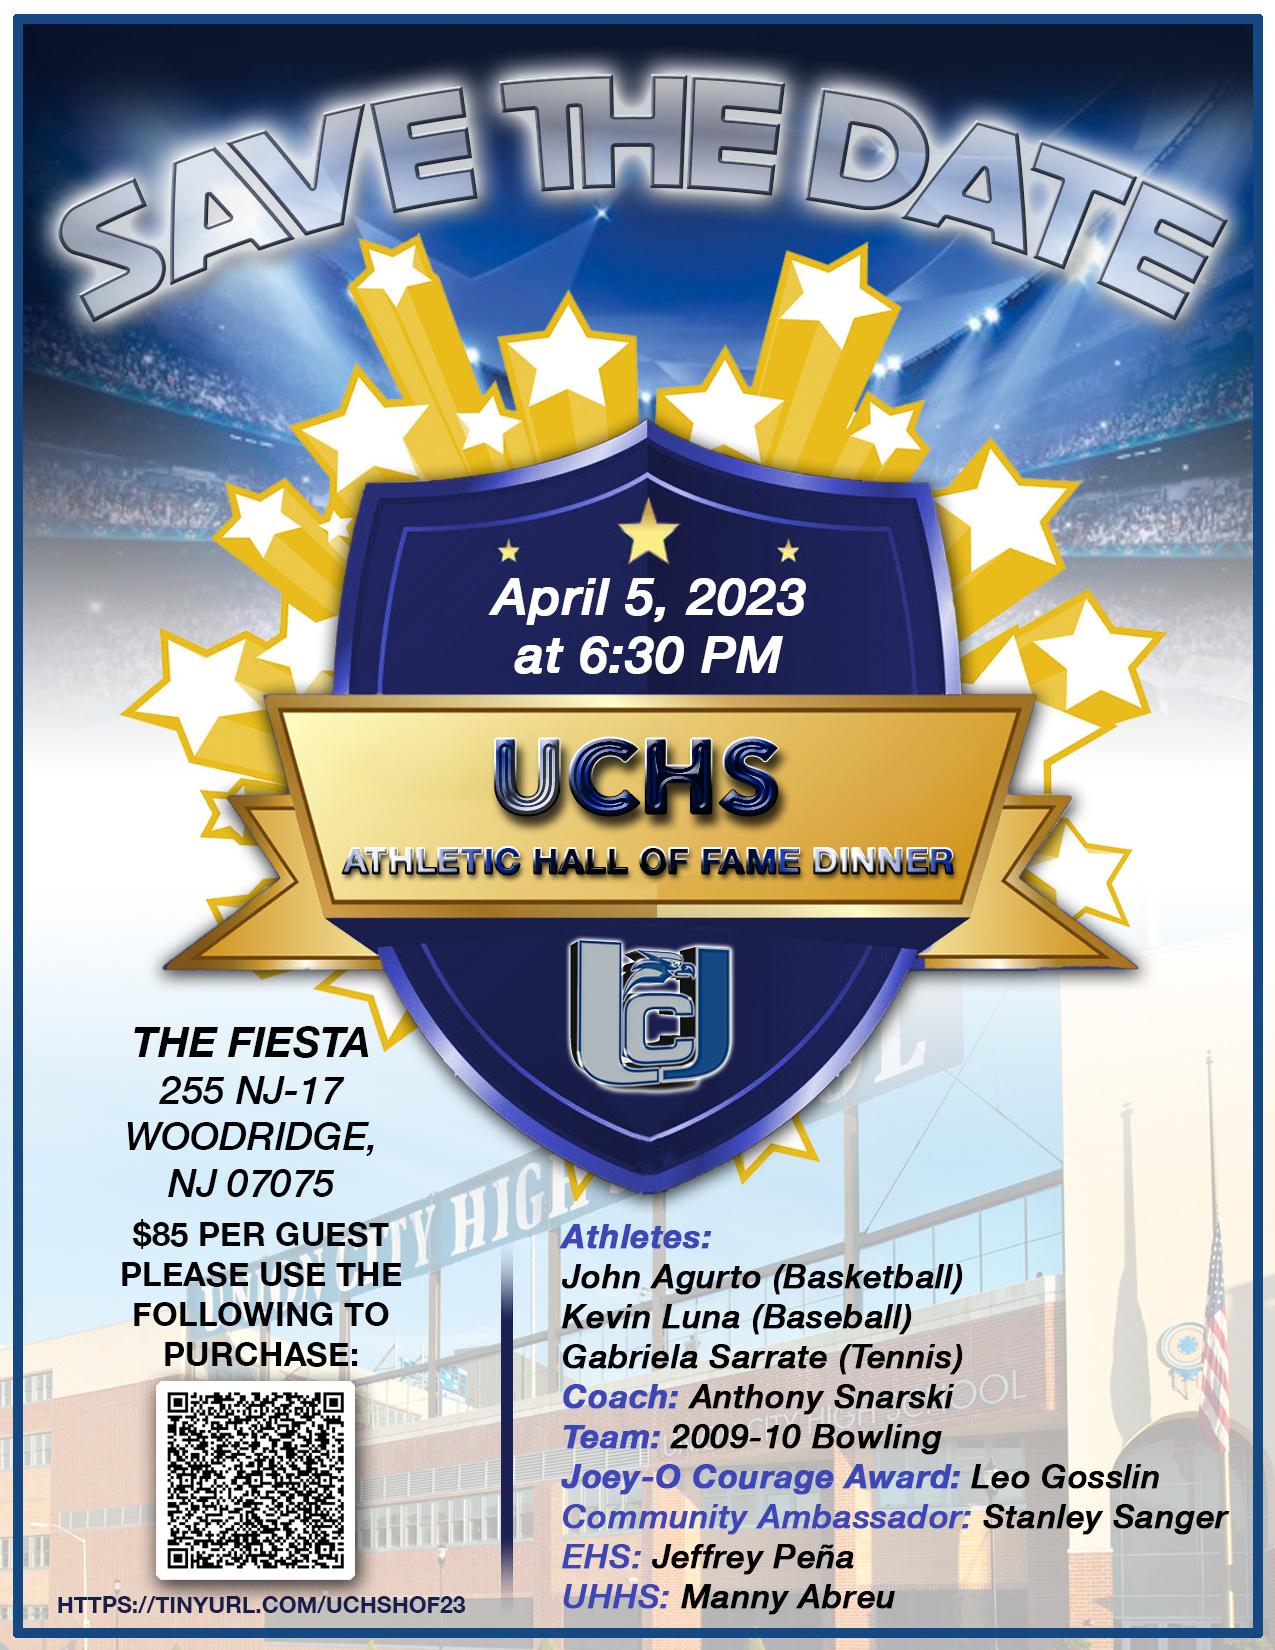 The UCHS Athletic Hall of Fame Dinner-Wednesday April 5, 2023 